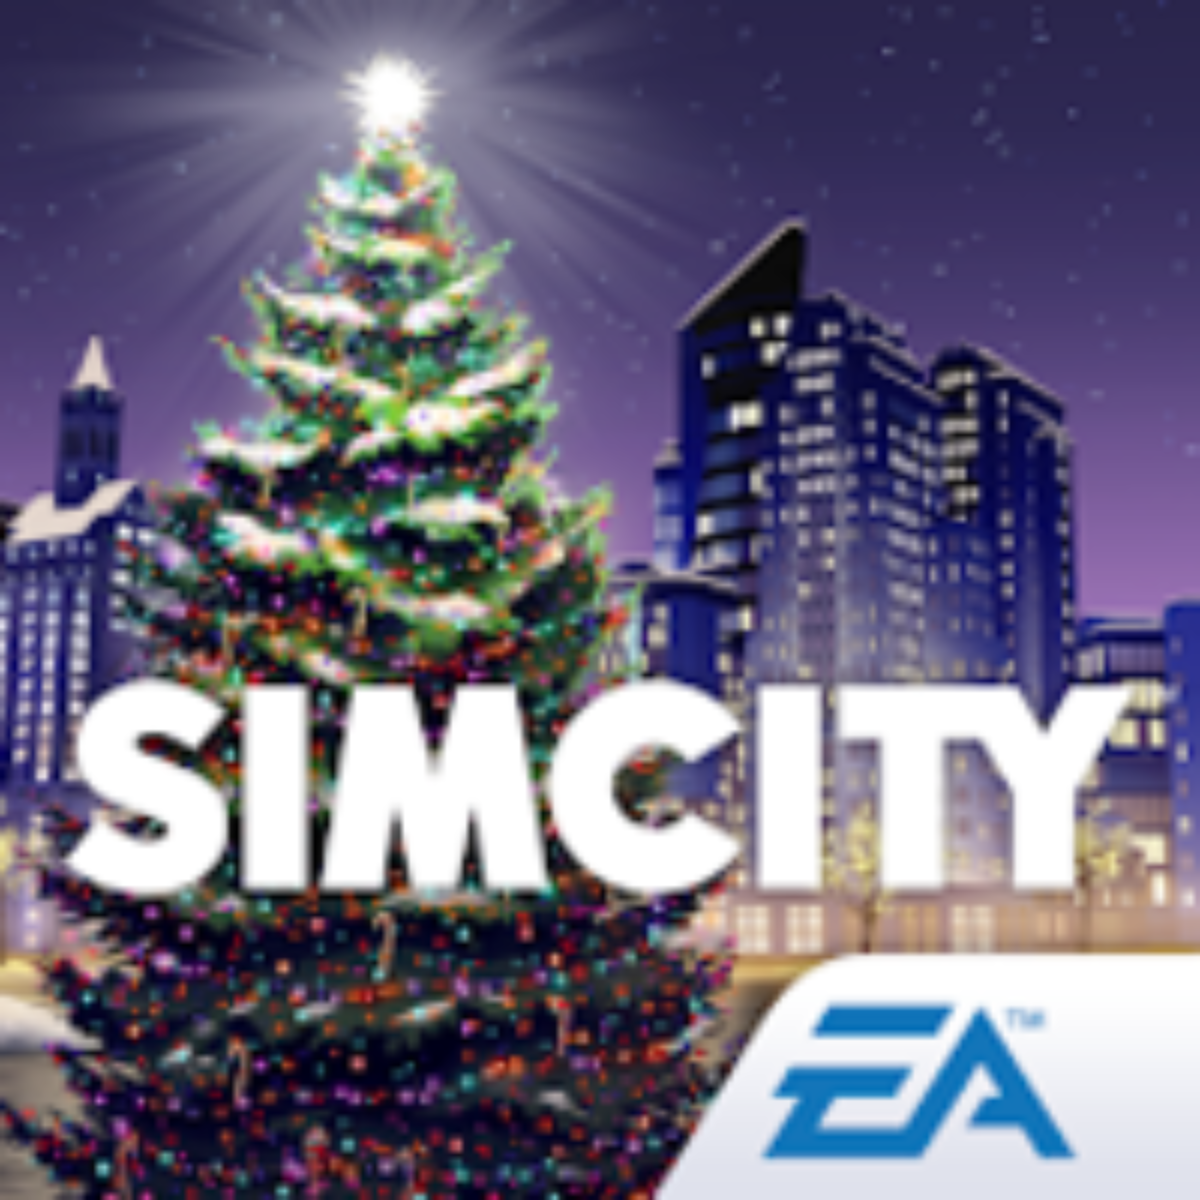 Simcity 2013 mods download